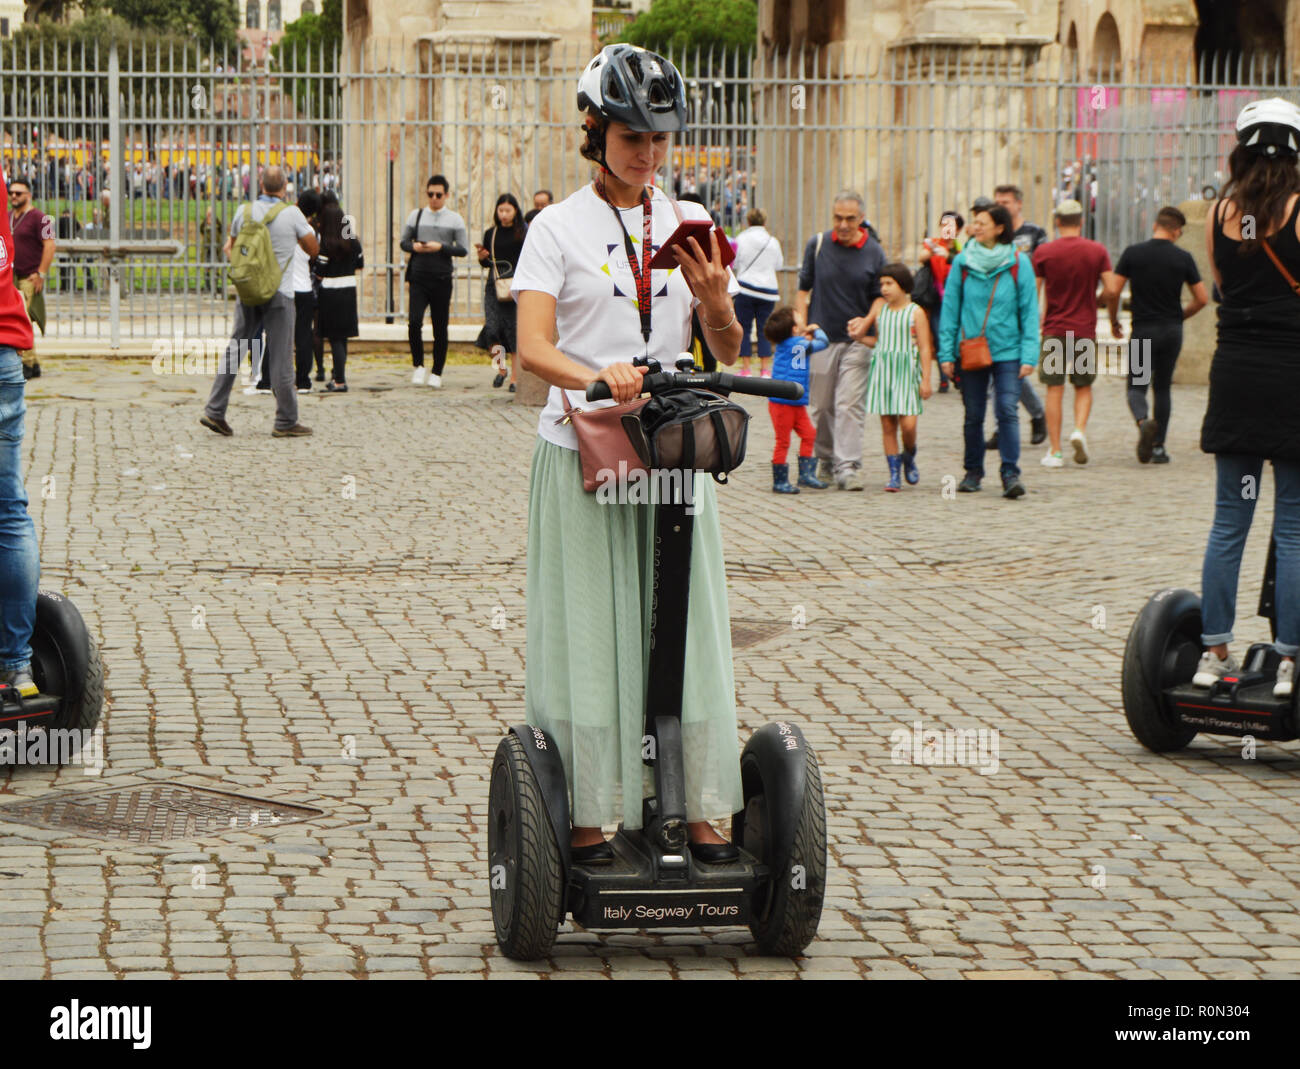 Rome, Italy-October 07, 2018, girl guide Segway City tour on Segway near Colosseum Stock Photo